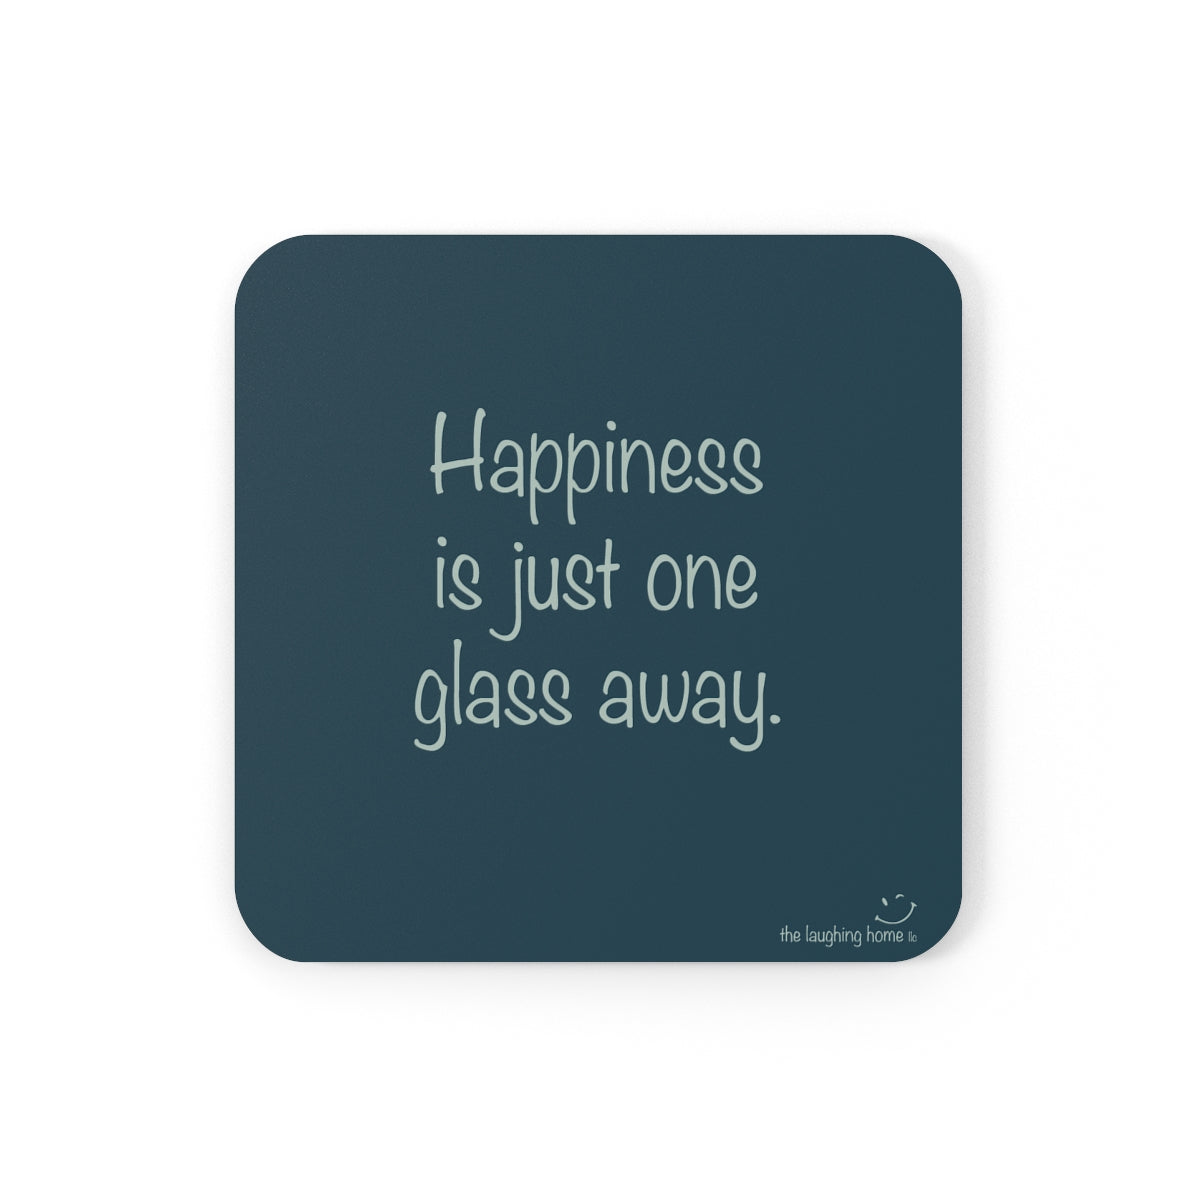 Happiness is just one glass away Corkwood Coaster Set of 4